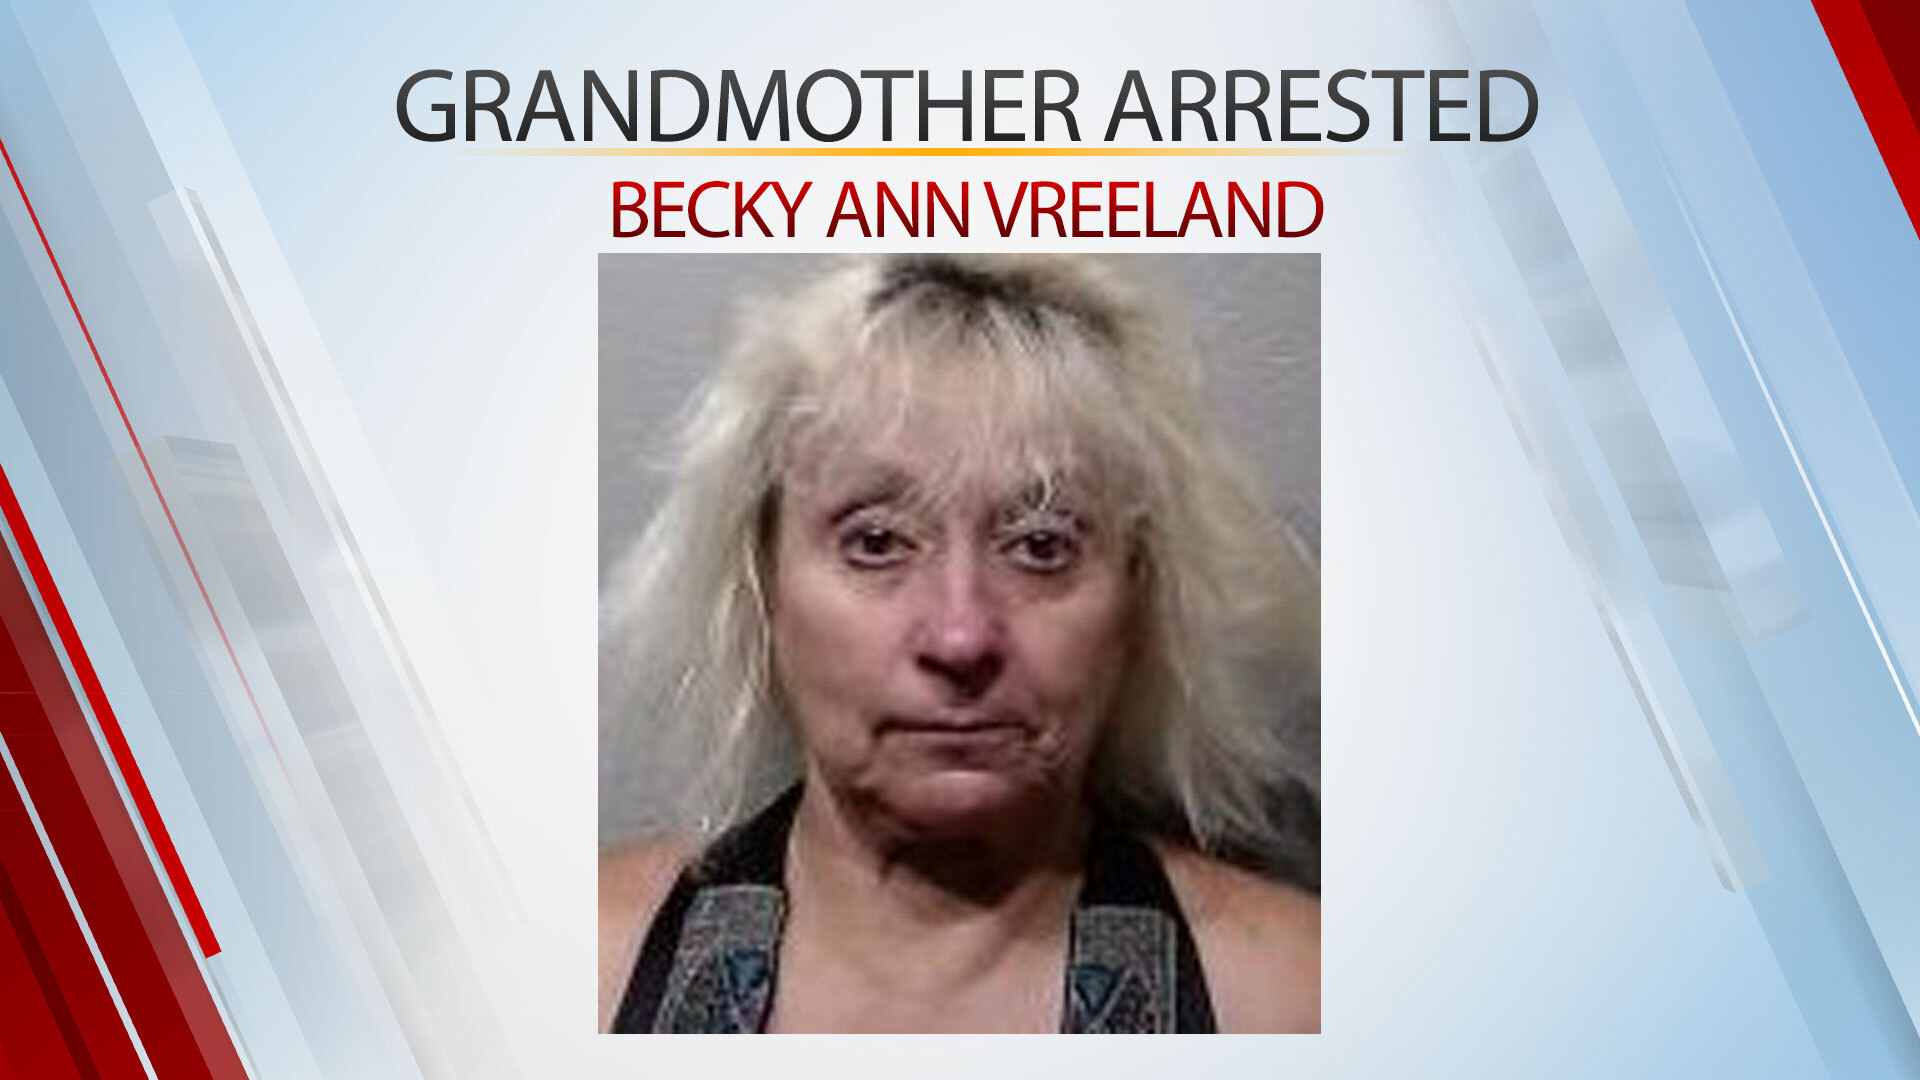 Woman Accused Of Killing Granddaughter To Appear In Court For Preliminary Hearing